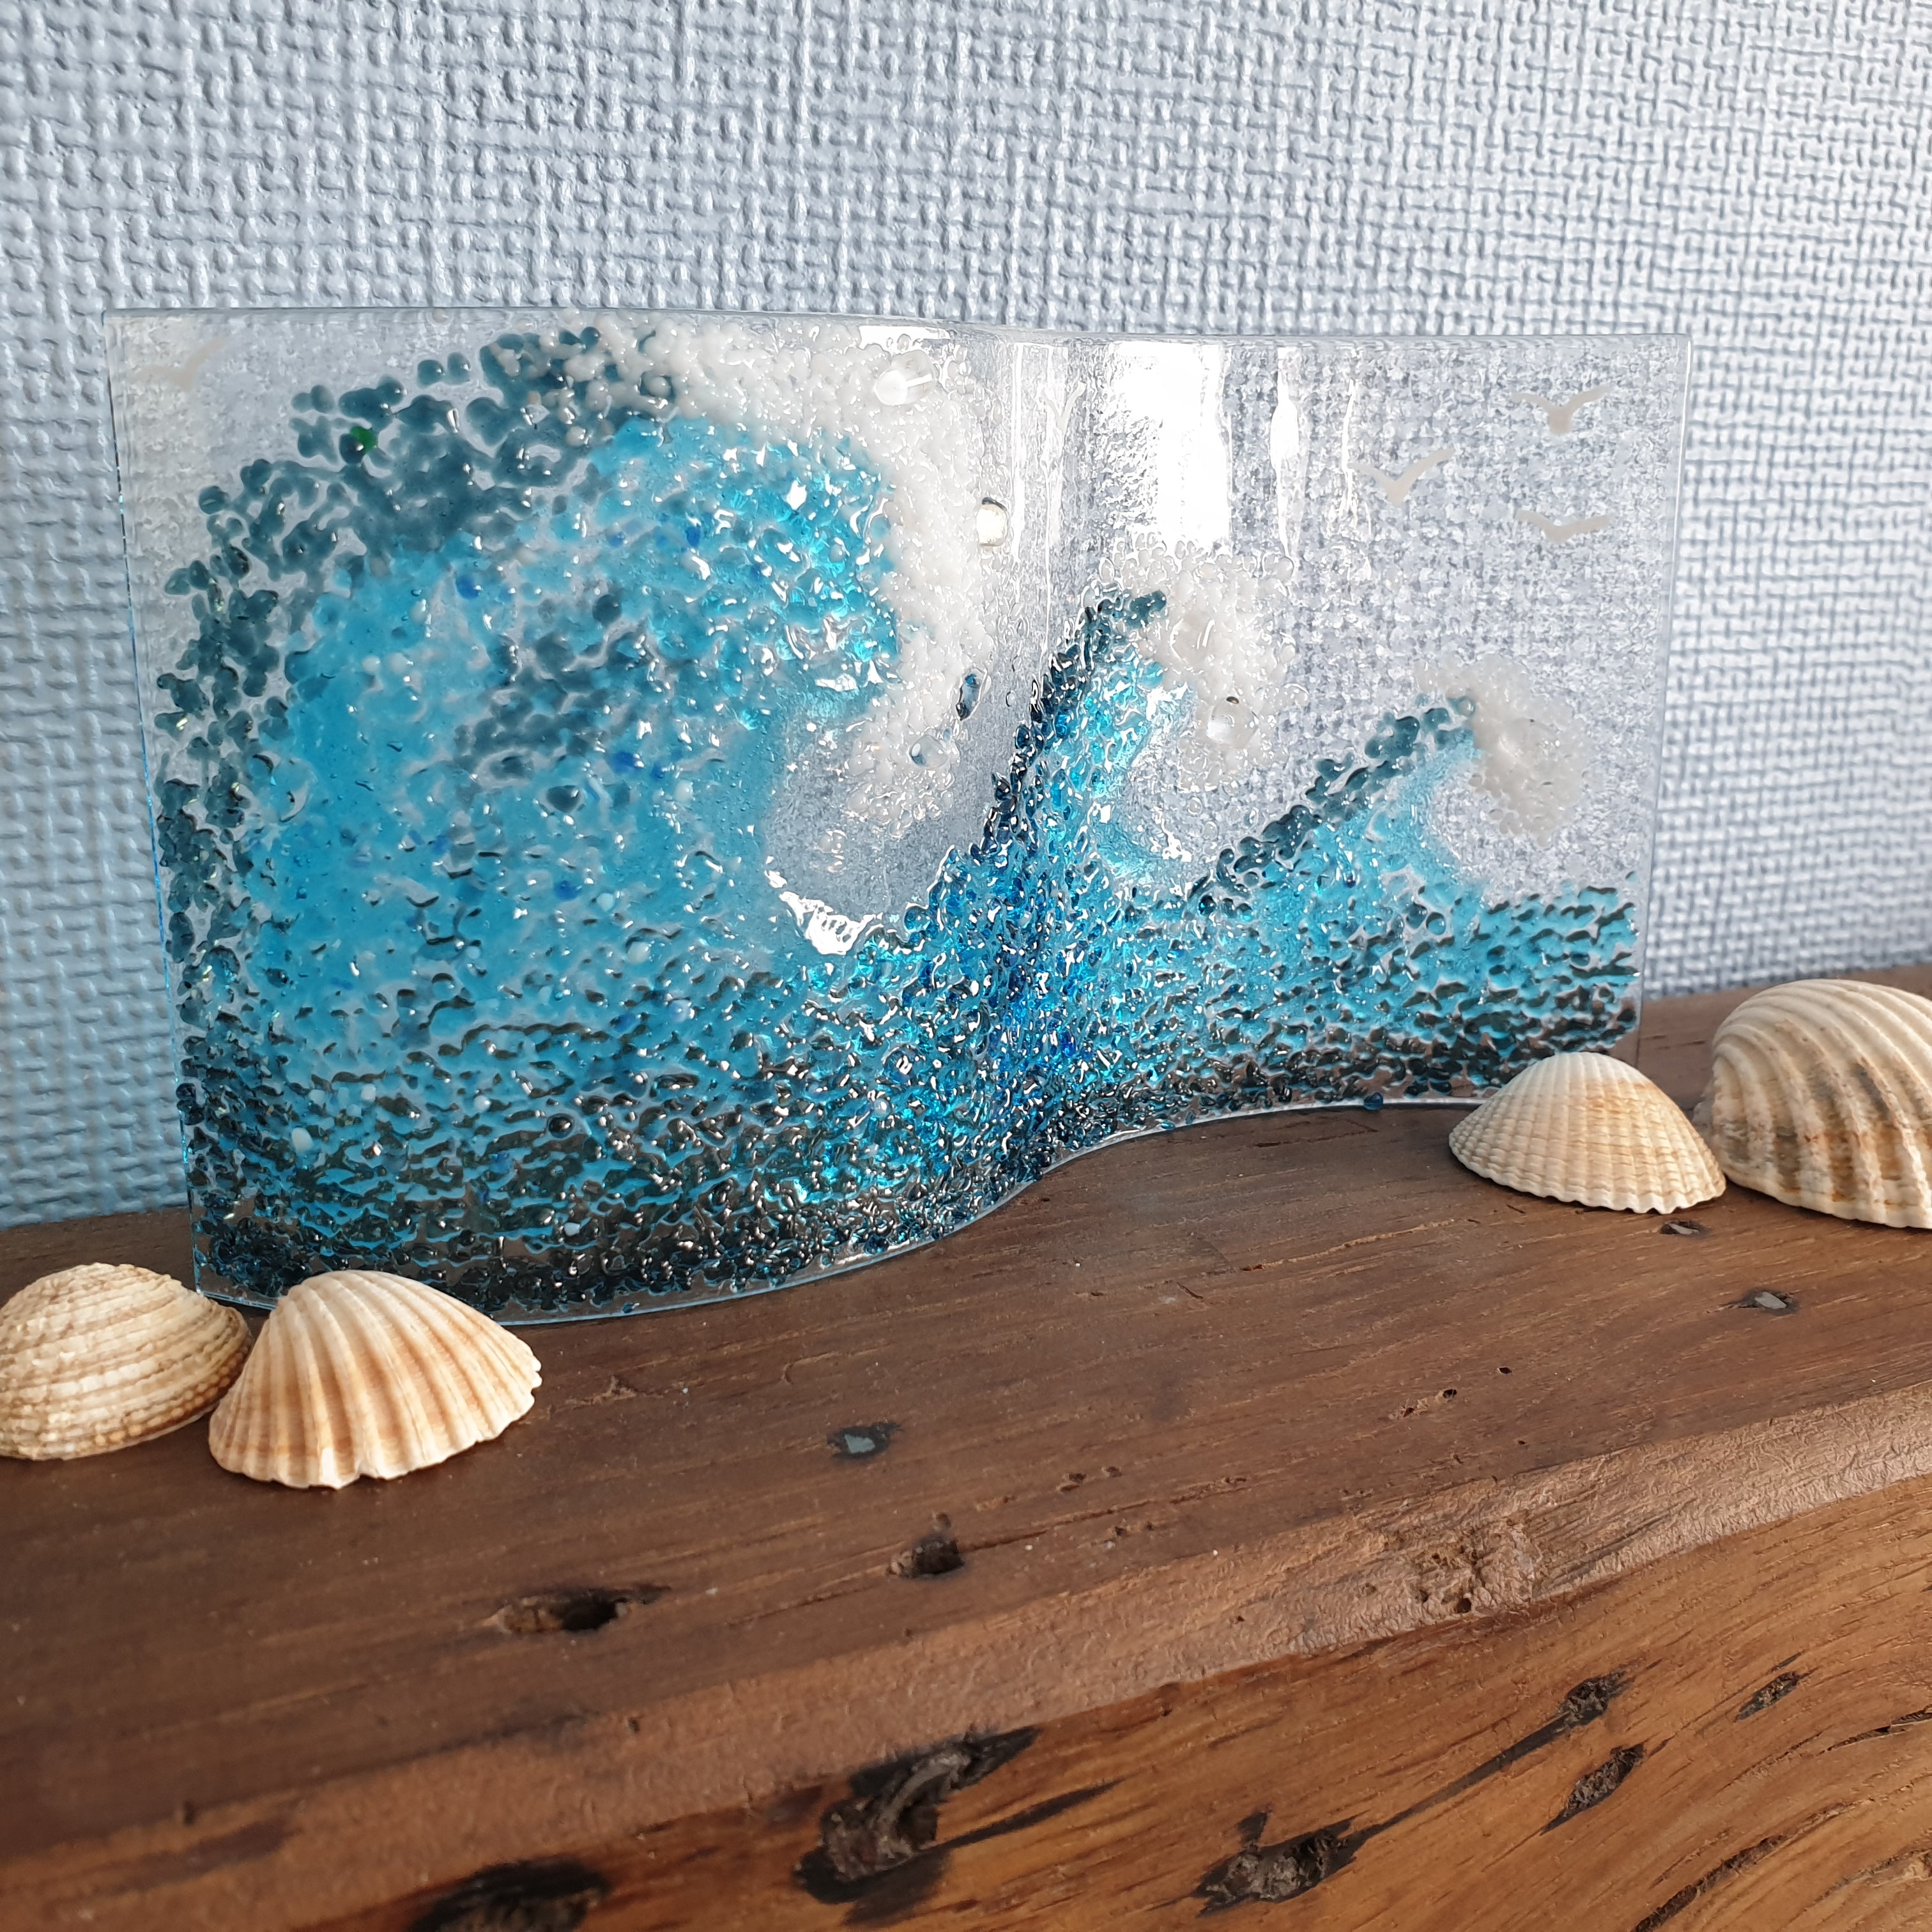 Freestanding Fused Glass Waves